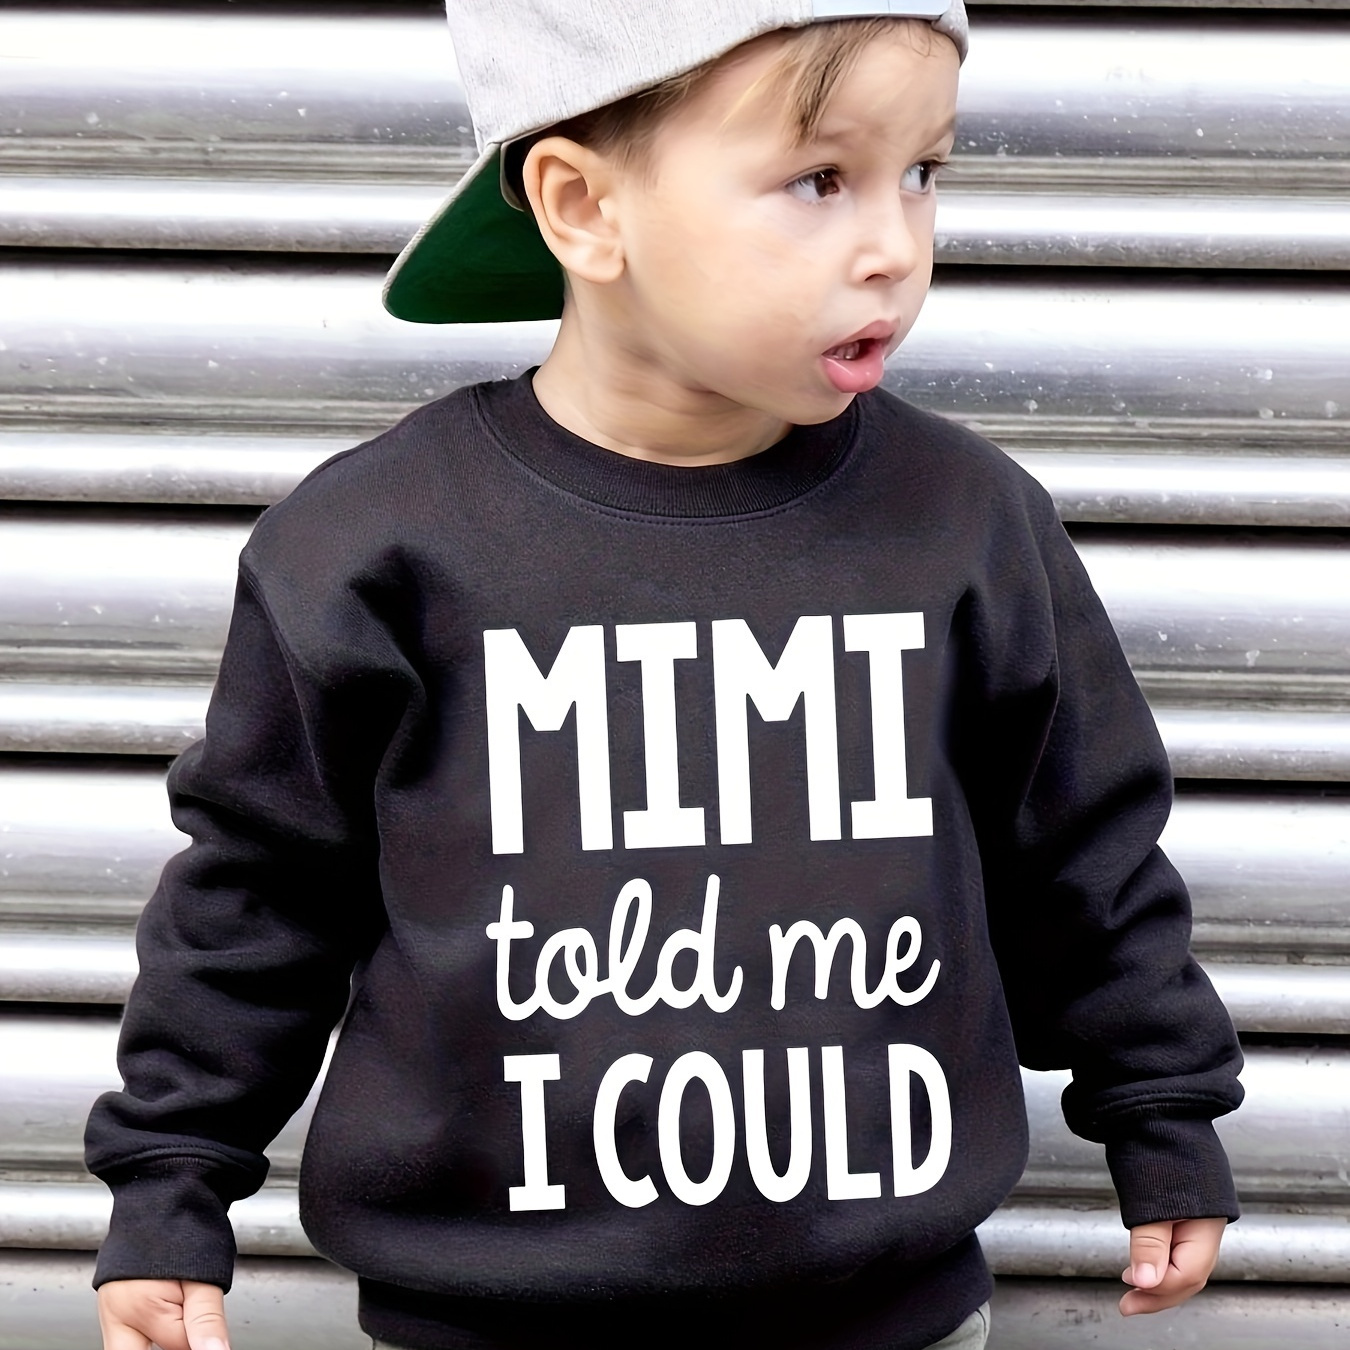 

Mimi Told Me I Could Letter Graphic Print Boys Warm Fleece Sweatshirt: Thick And Cozy Top For Spring Fall Winter Season